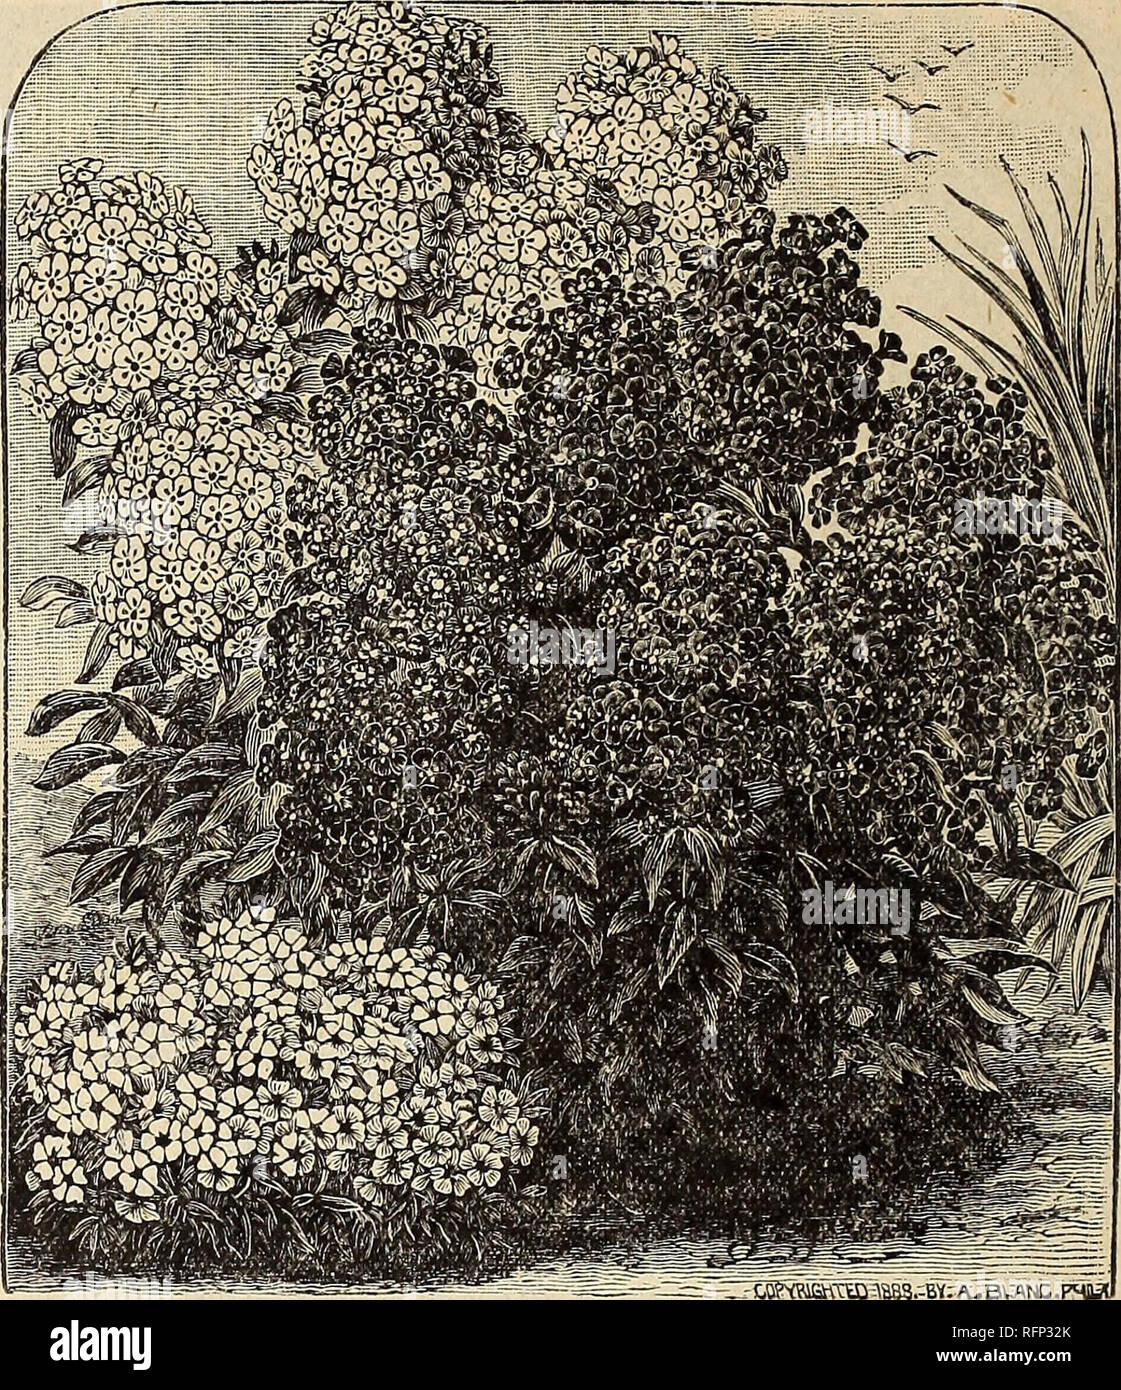 . Spring 1896. Nursery stock Ohio Catalogs; Roses Ohio Catalogs; Flowers Catalogs; Vegetables Catalogs; Nursery stock; Roses; Flowers; Vegetables. 56. HARDY PHLOXES. PHLOX. HARDY PERENNIAL. The new French varieties all carry very fine, distinct, pure- colors, in great trusses, many of them beautifully shaded and marked with very distinct, clear, bright eyes. They re- quire no care but dividing and resetting every second year. Instead of the thin flowers, which were limited to lilac and white colors, we now have gorgeous flowers, combining all the different tints of rose, carmine, red and purpl Stock Photo